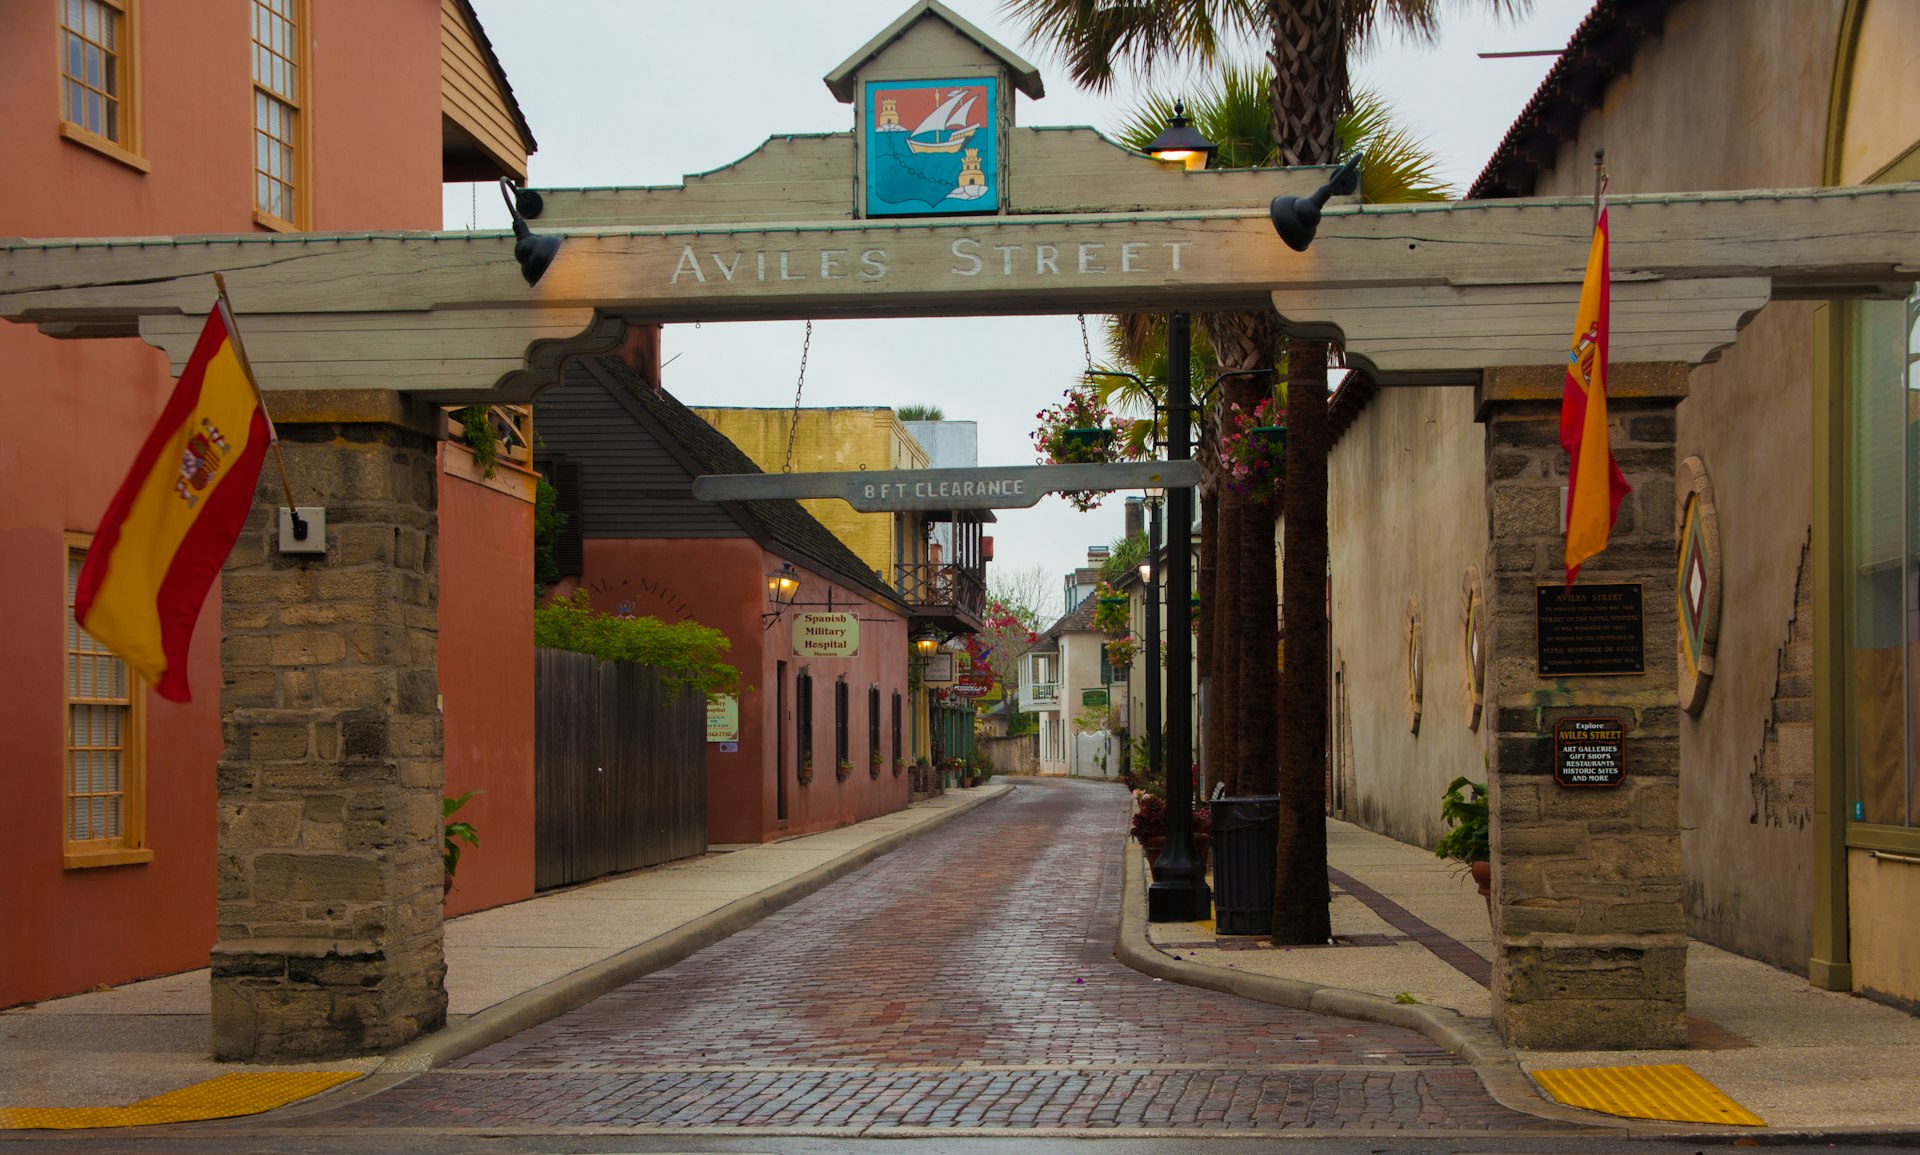 A historic street in a town with a large wooden archway welcoming you to the district